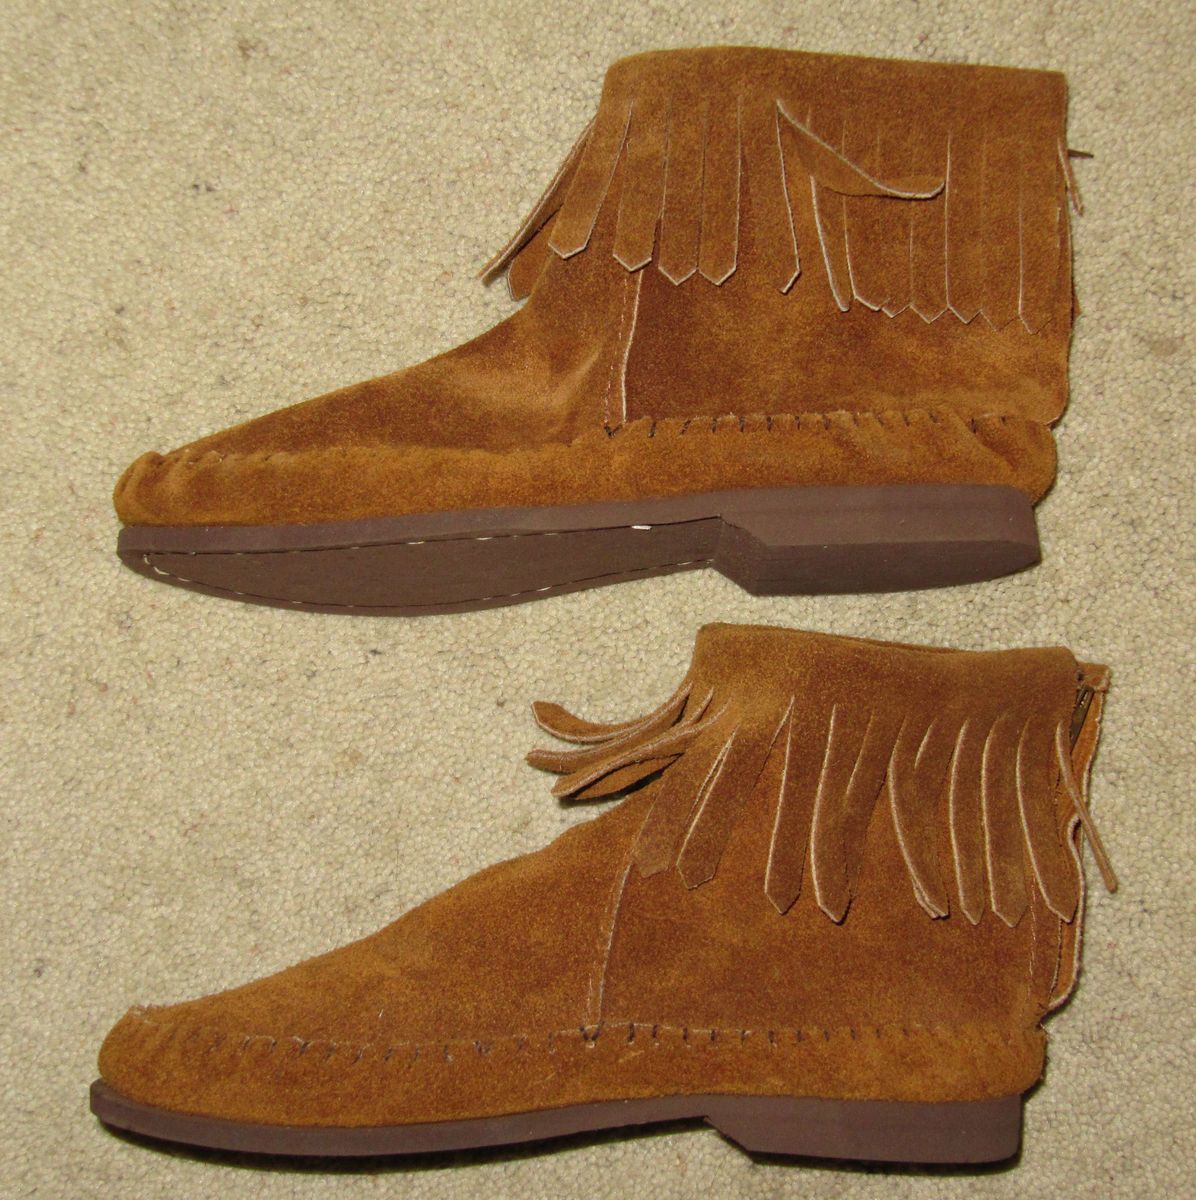   Brown SUEDE LEATHER MOCCASINS Ankle Boots w FRINGE Indian Costume 4 5